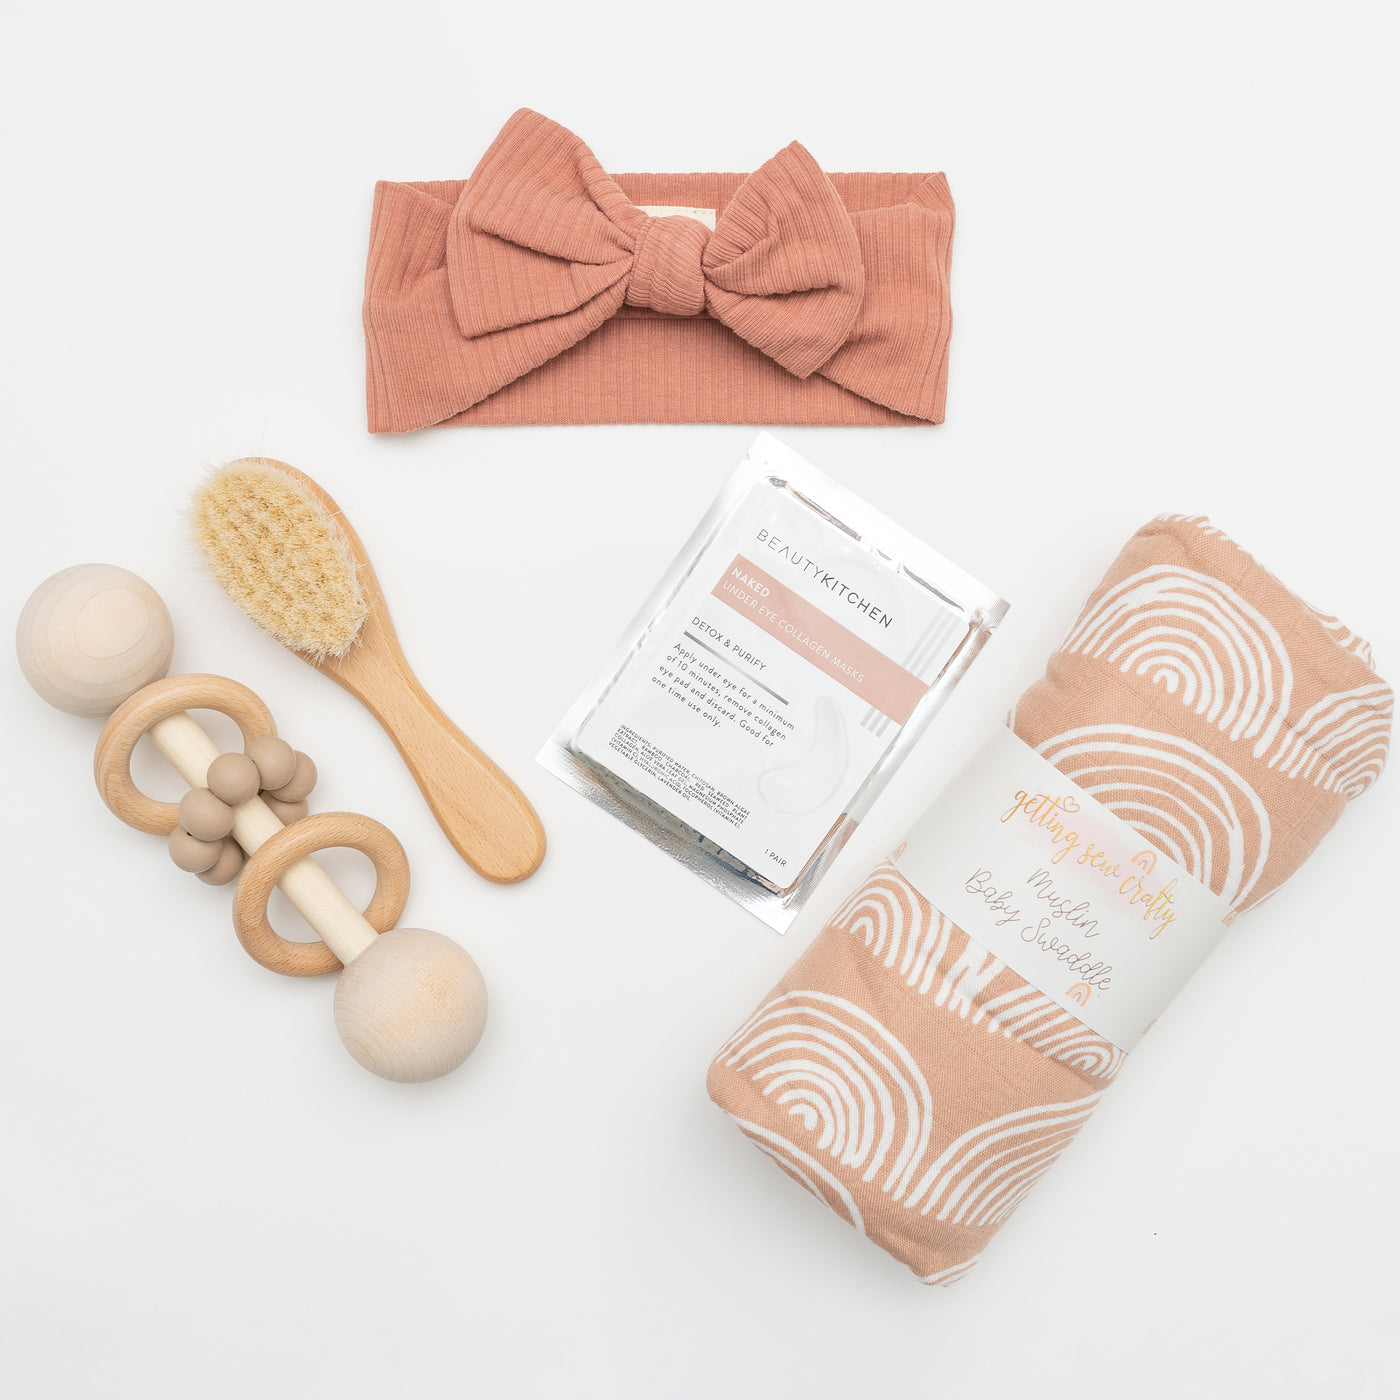 Celebrate the arrival of a new baby with this modern, elegant and practical gift box. Items: Swaddle Blanket, Organic Cotton Headband, Natural Wood Rattle, Naked Collagen Eye Gels, Soft Baby Hair Brush.